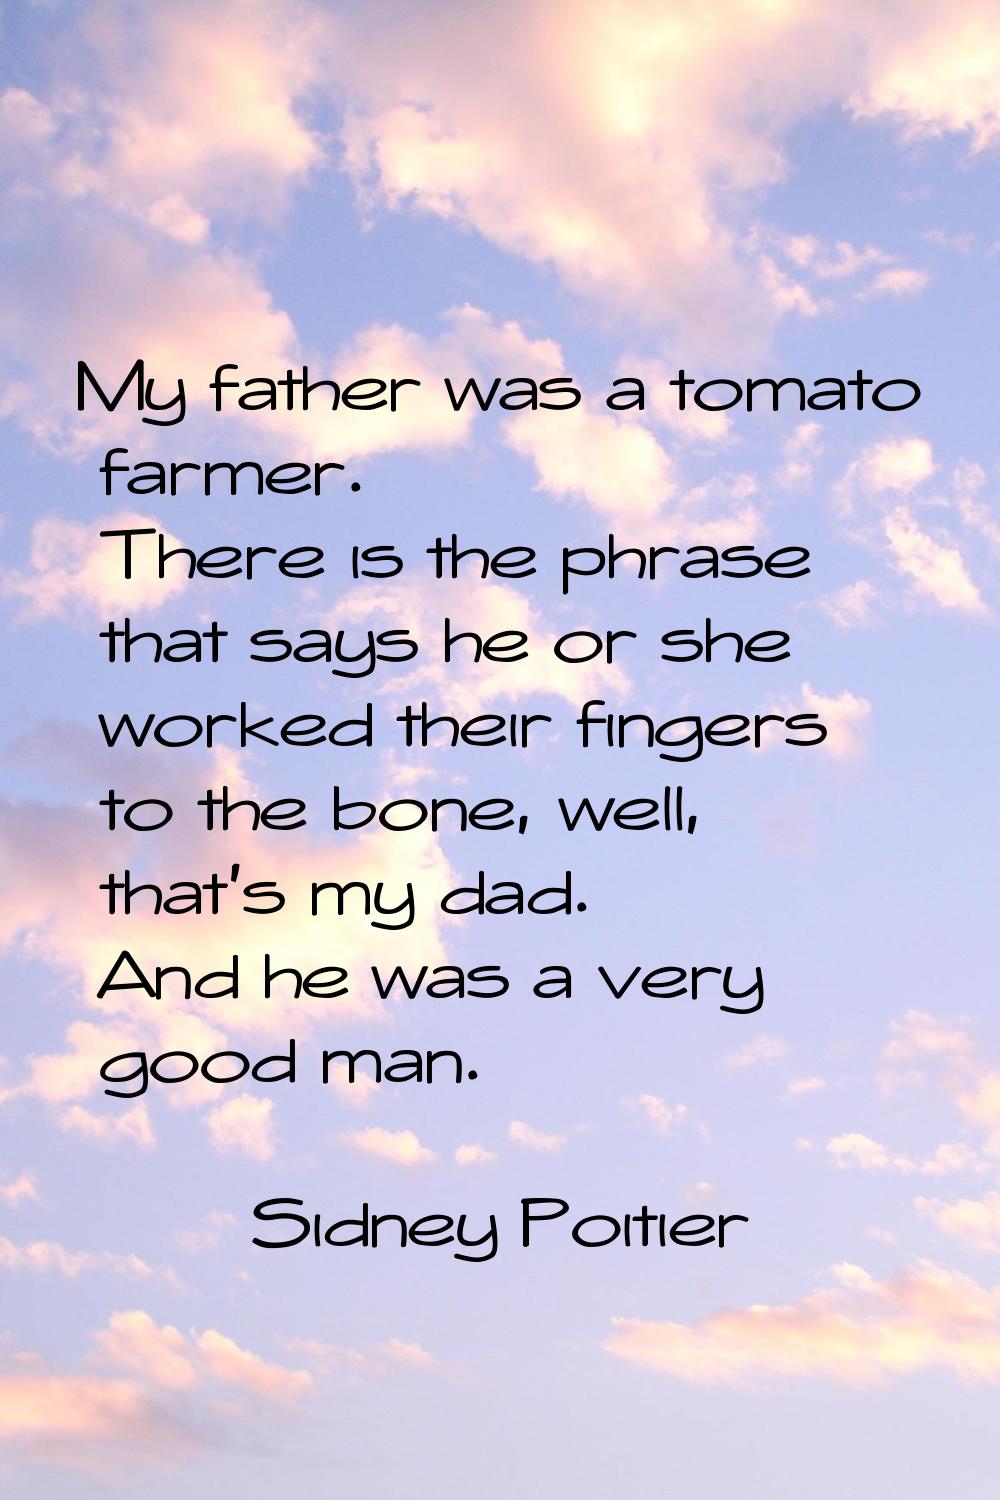 My father was a tomato farmer. There is the phrase that says he or she worked their fingers to the 